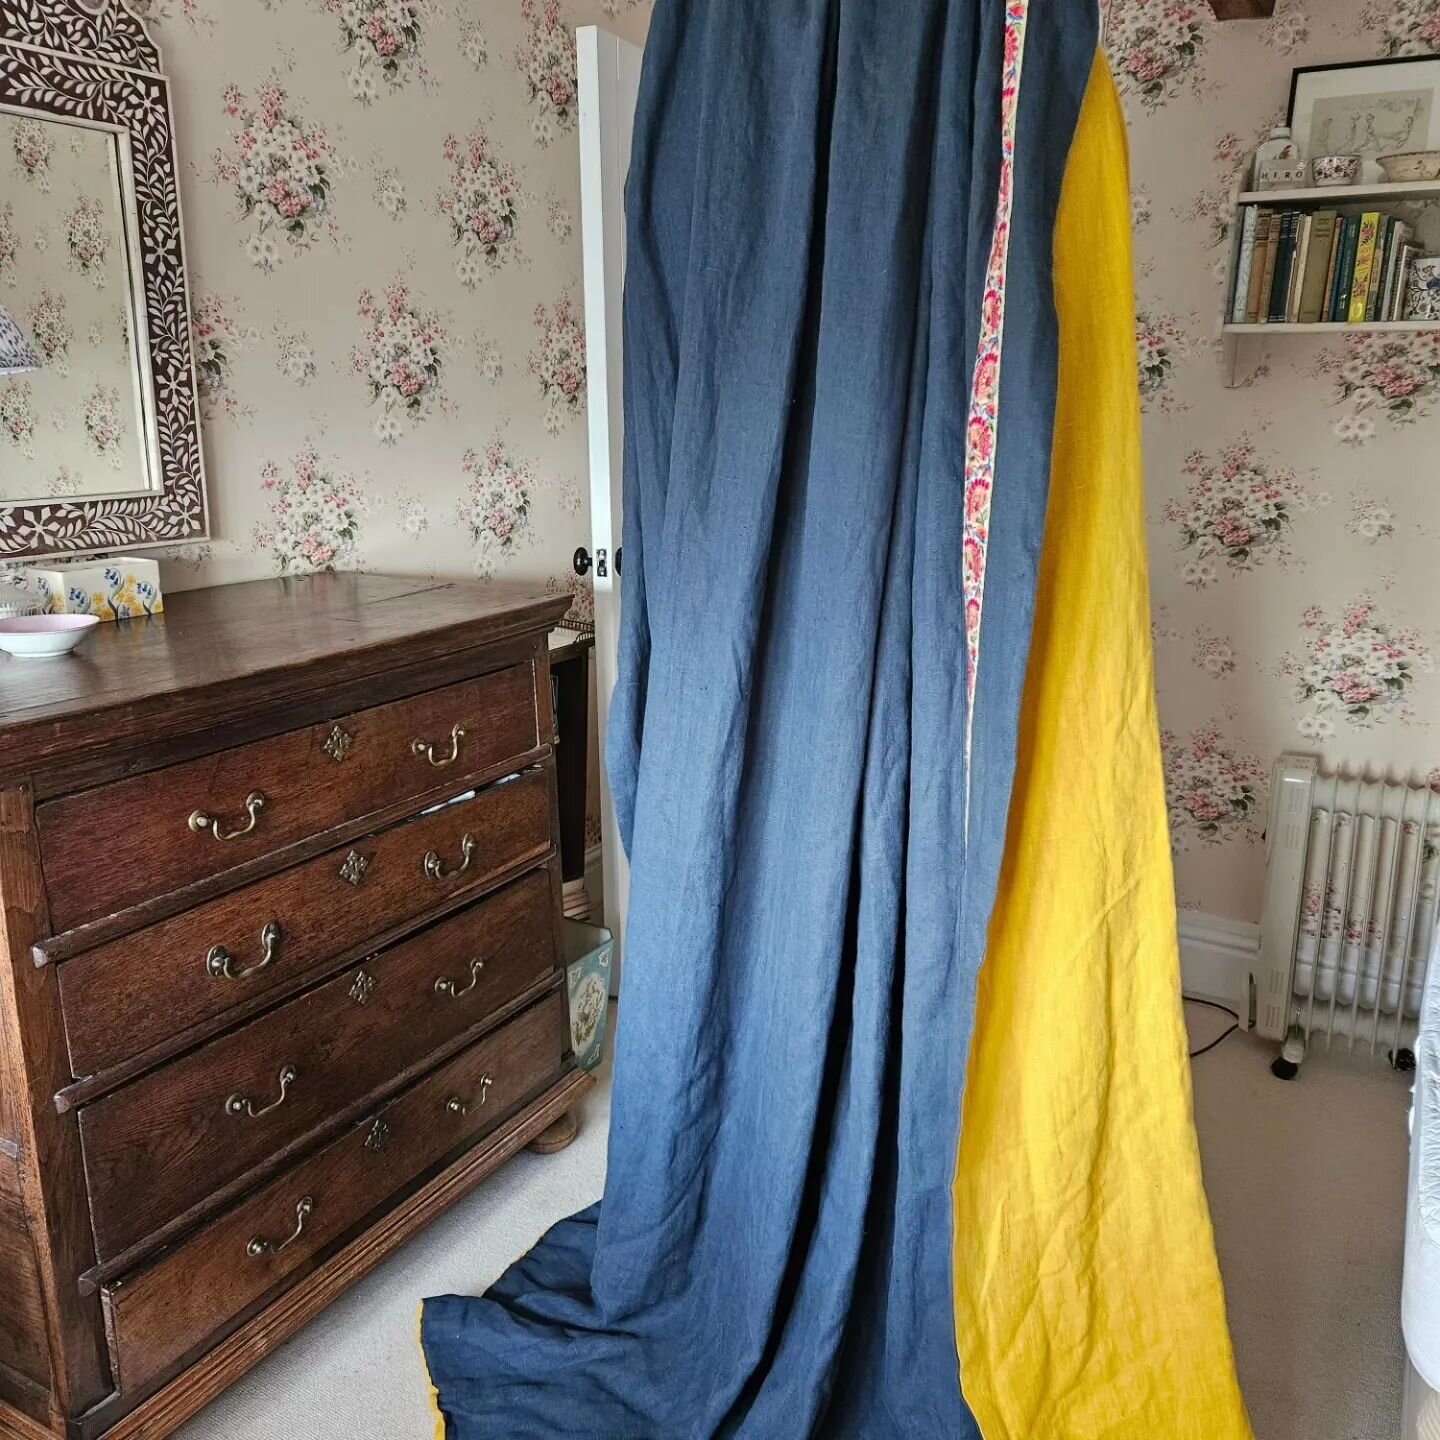 FOR SALE 👀
Single curtain
Perfect for a draft front door
Measures 227cm Drop x 195cm Wide
The Cloth Shop linen
Navy and yellow contrast with beautiful Cloth Shop trim along the lead edge
Double pinch pleat heading
Message me for more information 
Of